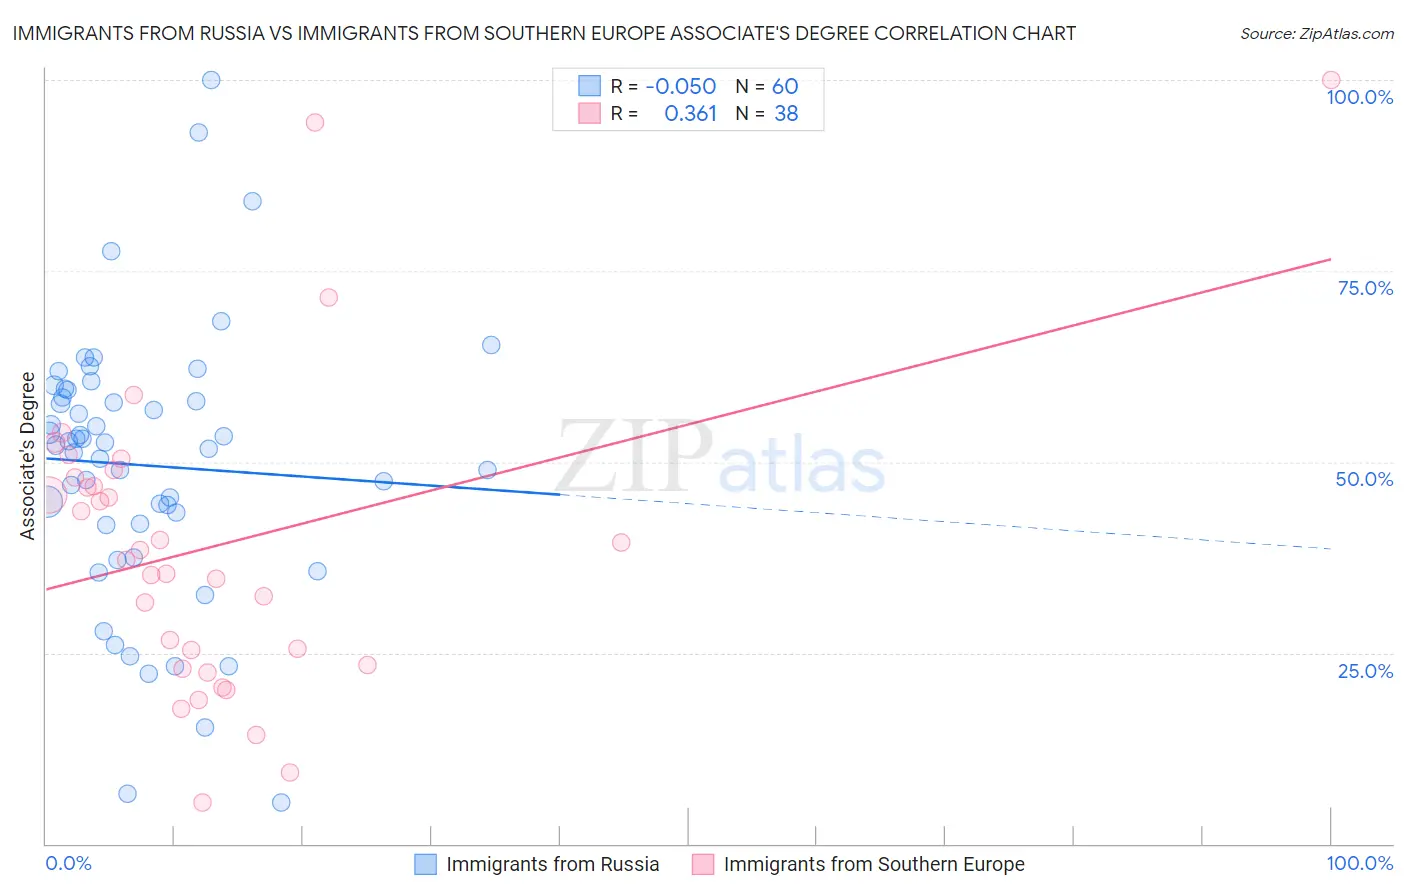 Immigrants from Russia vs Immigrants from Southern Europe Associate's Degree